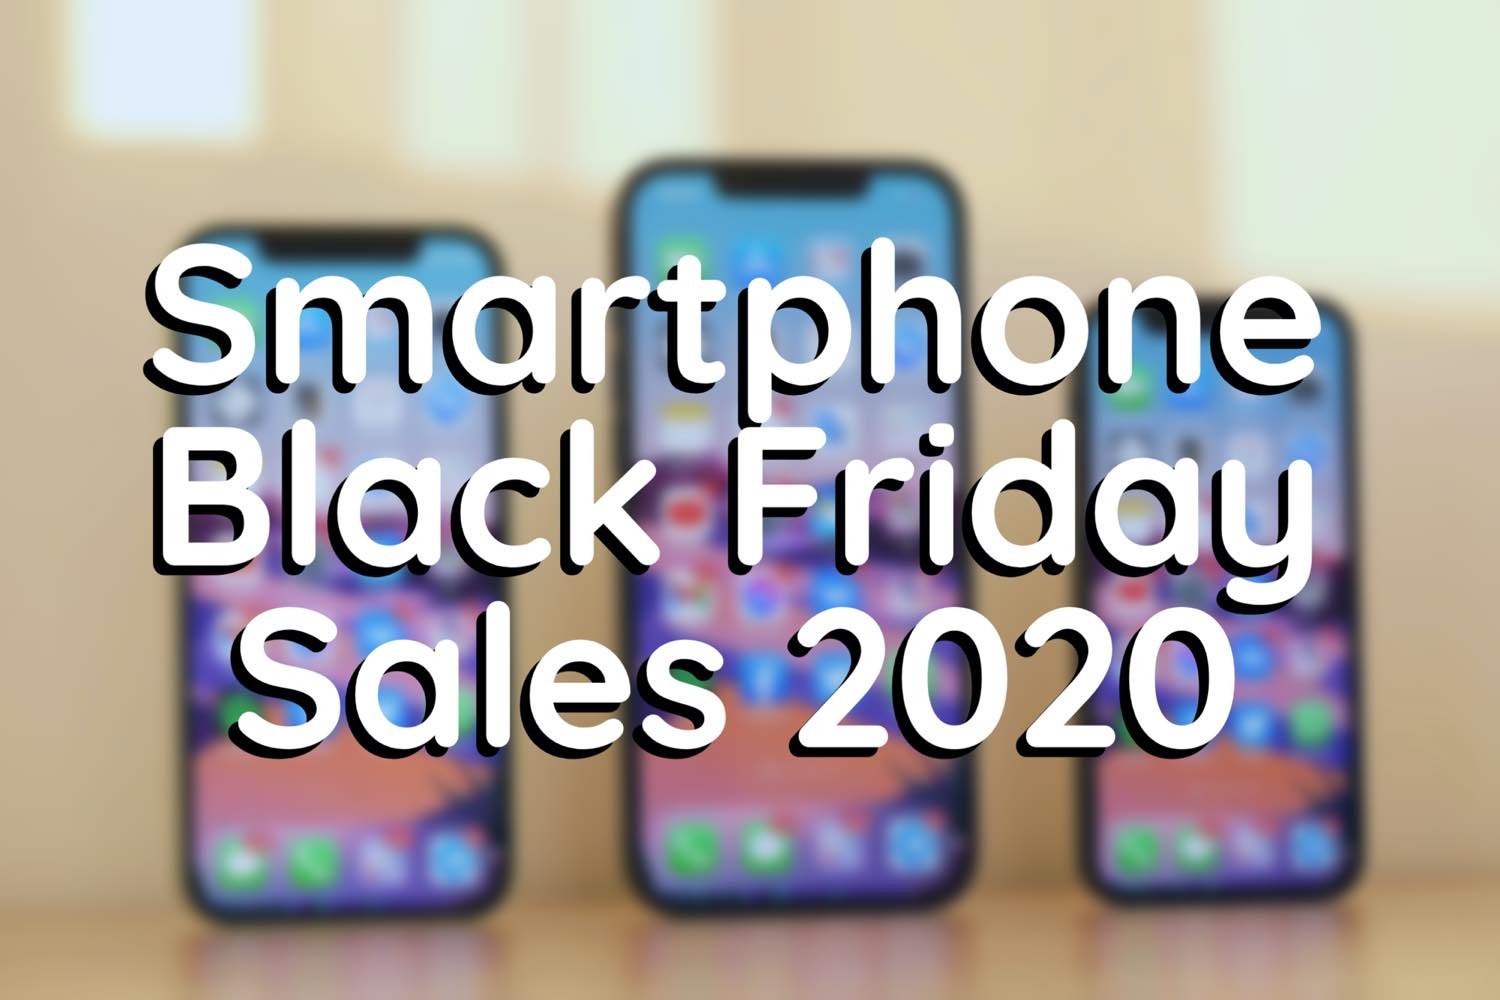 Black Friday 2020 Smartphone Sales Brings Great Discounts On iPhone 12